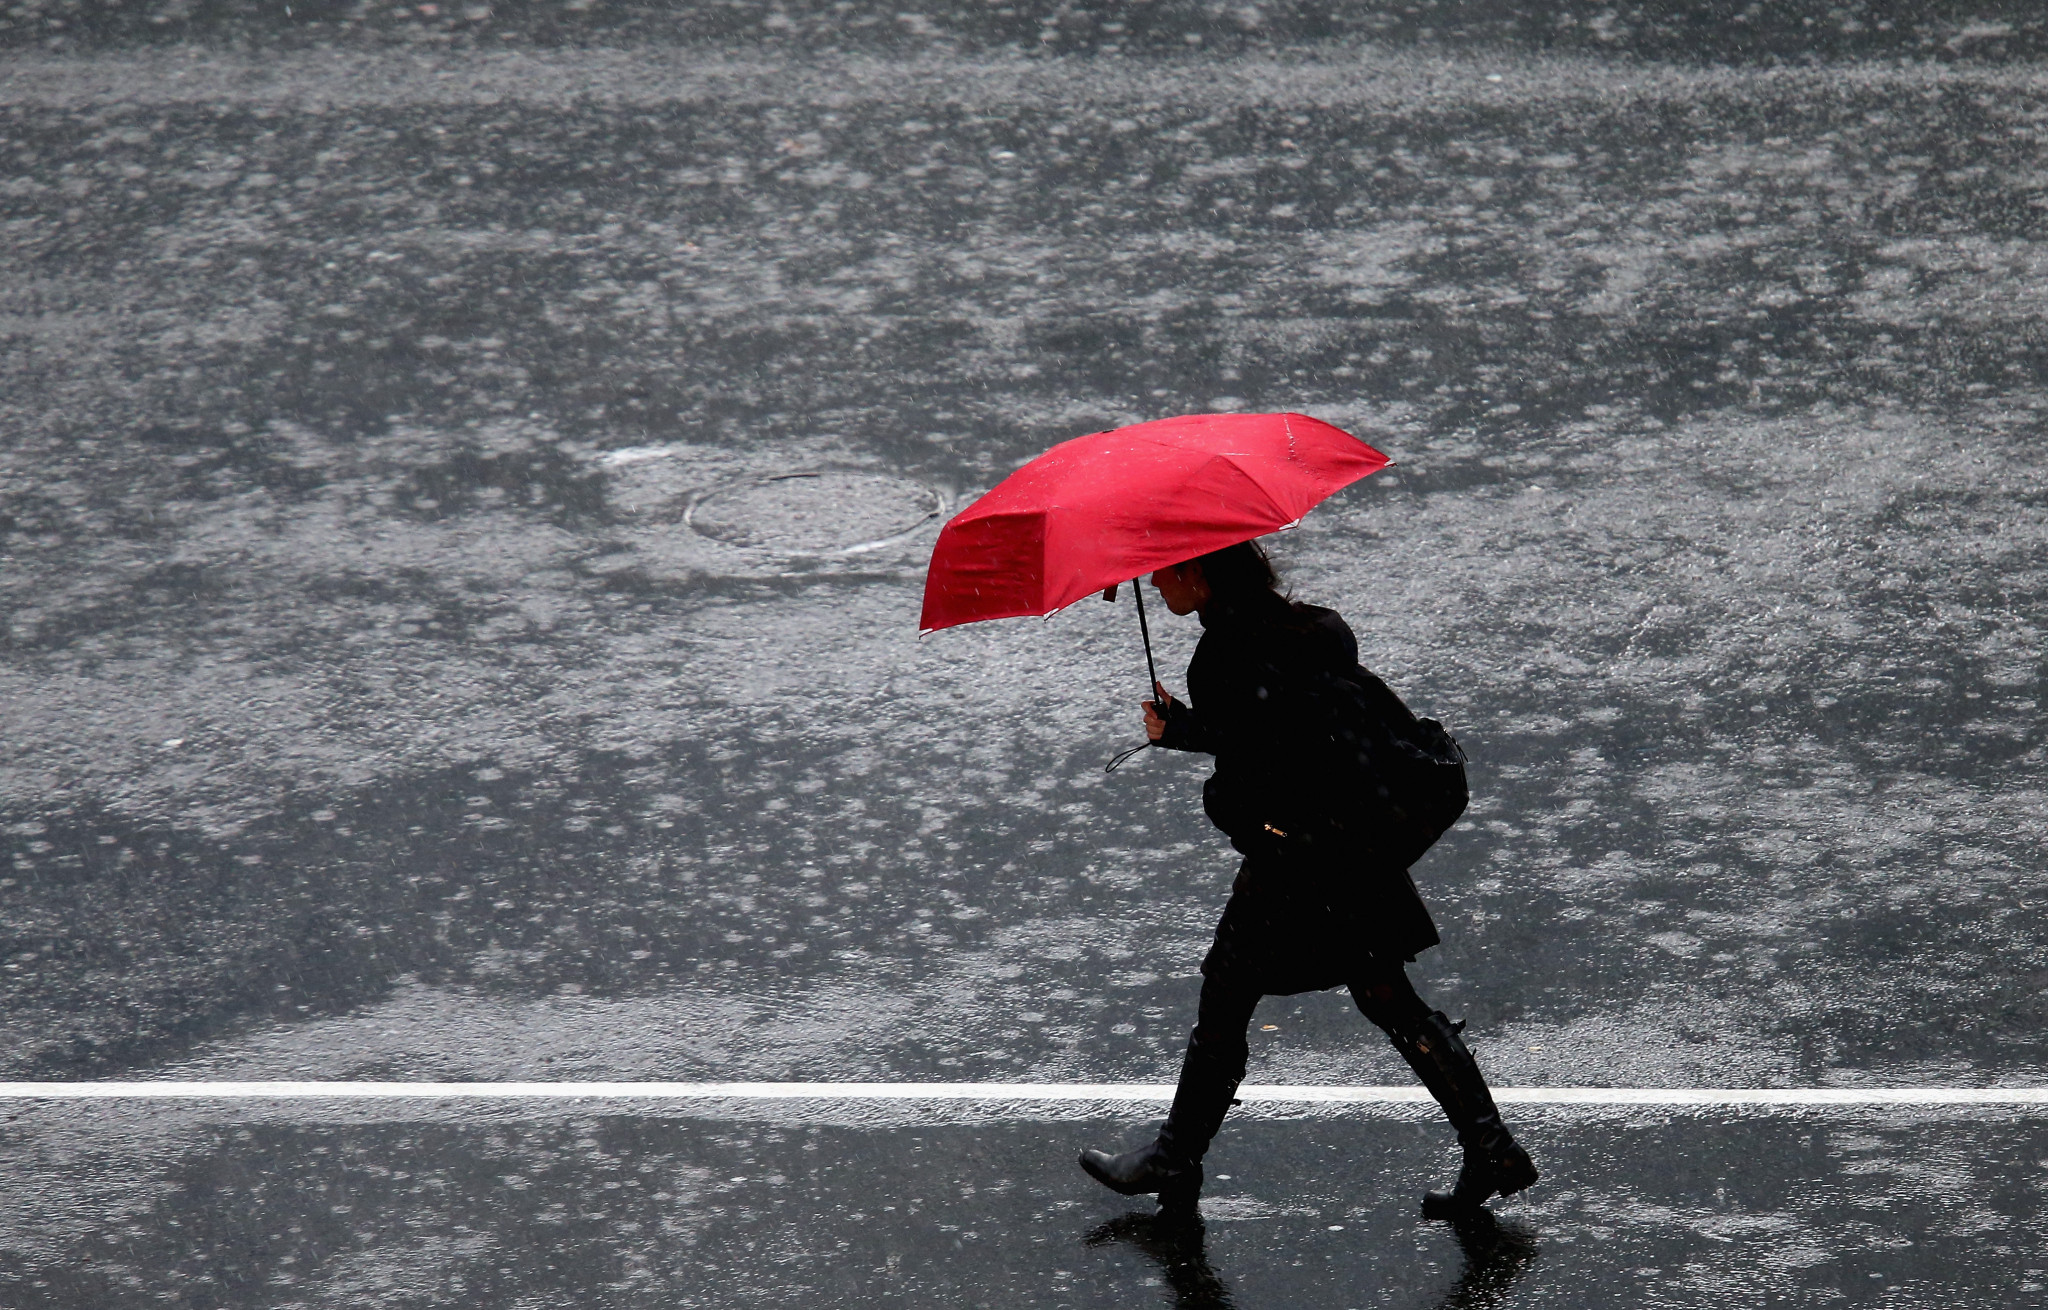 Heavy rain and winds affected the World Games competition yesterday ©Getty Images